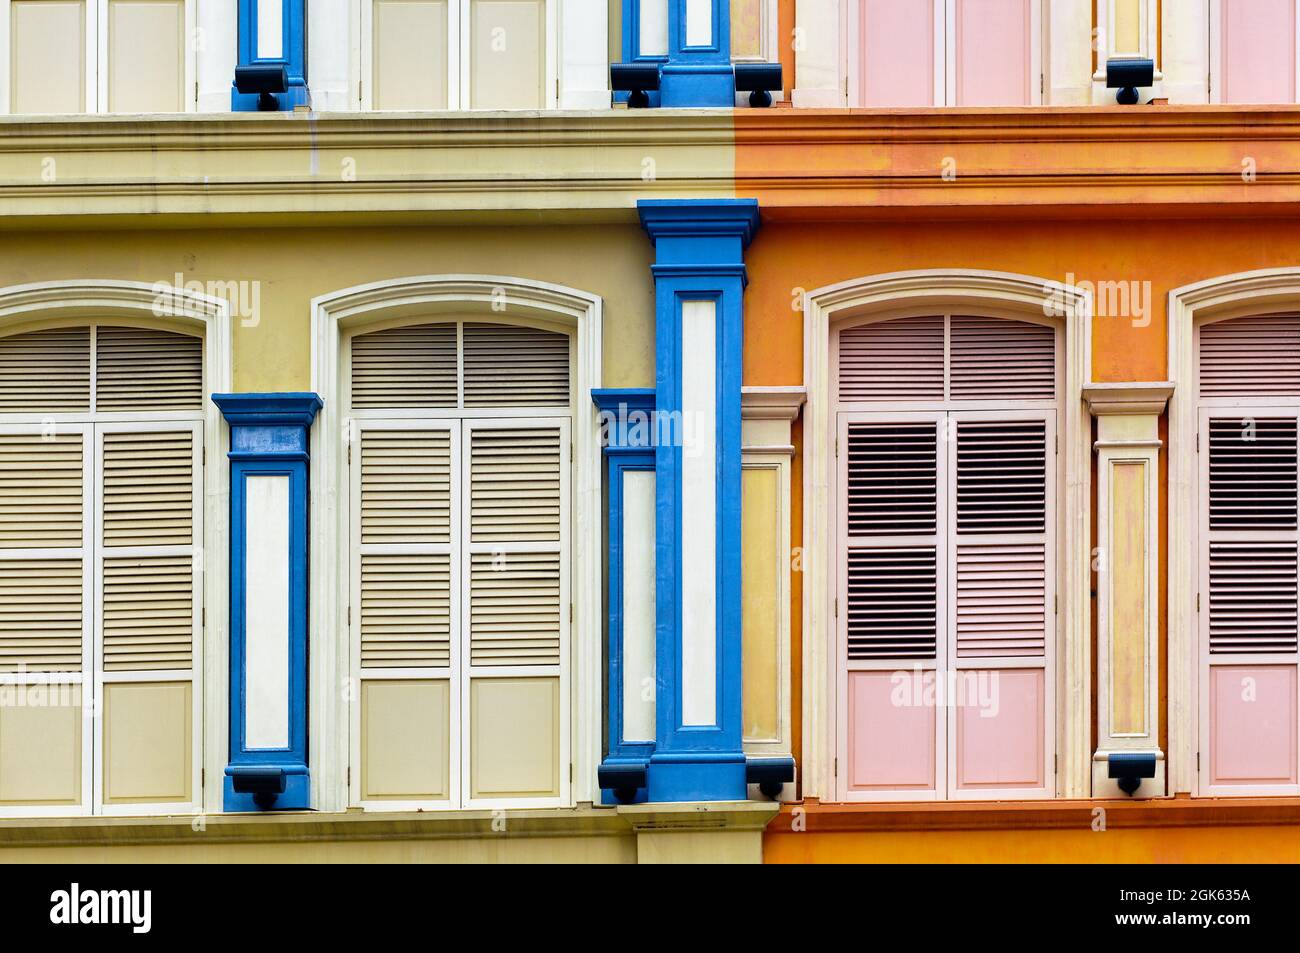 TRaditional blinds and windows over Chinese shophouses, Singapore, Asia Stock Photo